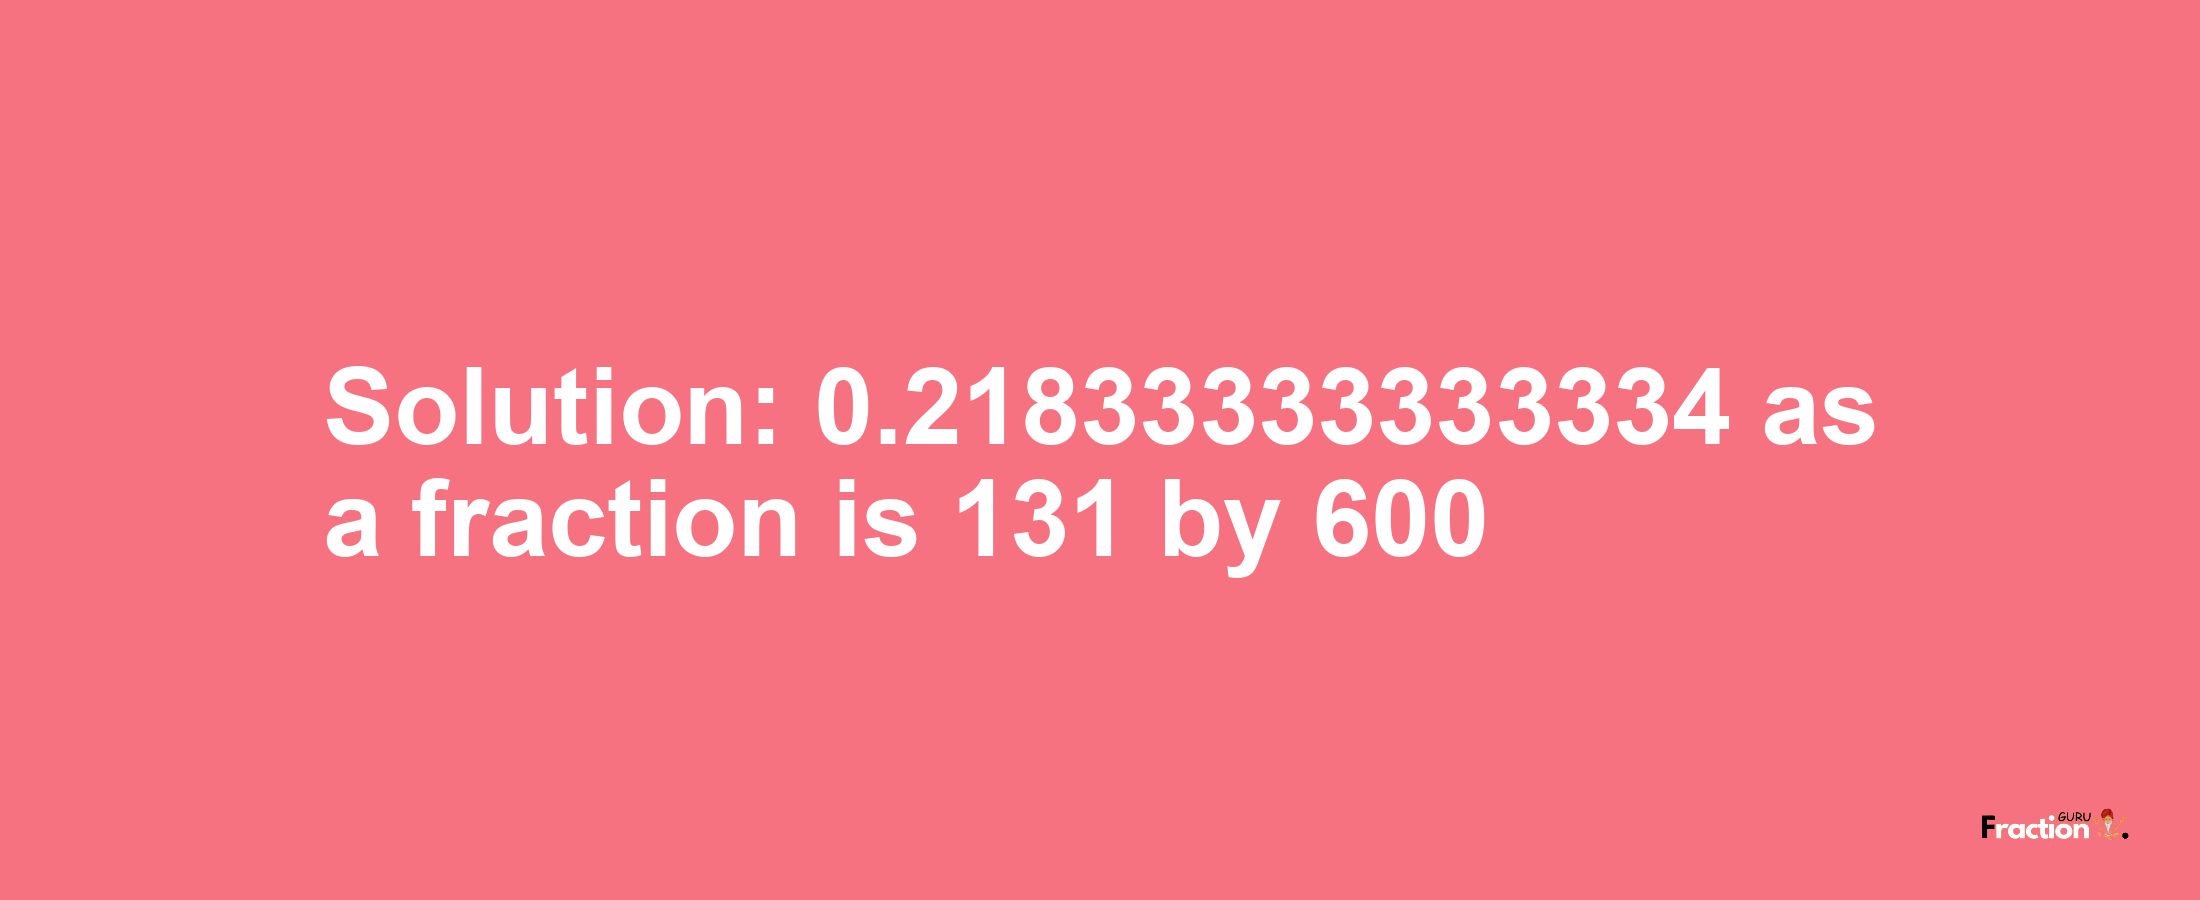 Solution:0.21833333333334 as a fraction is 131/600